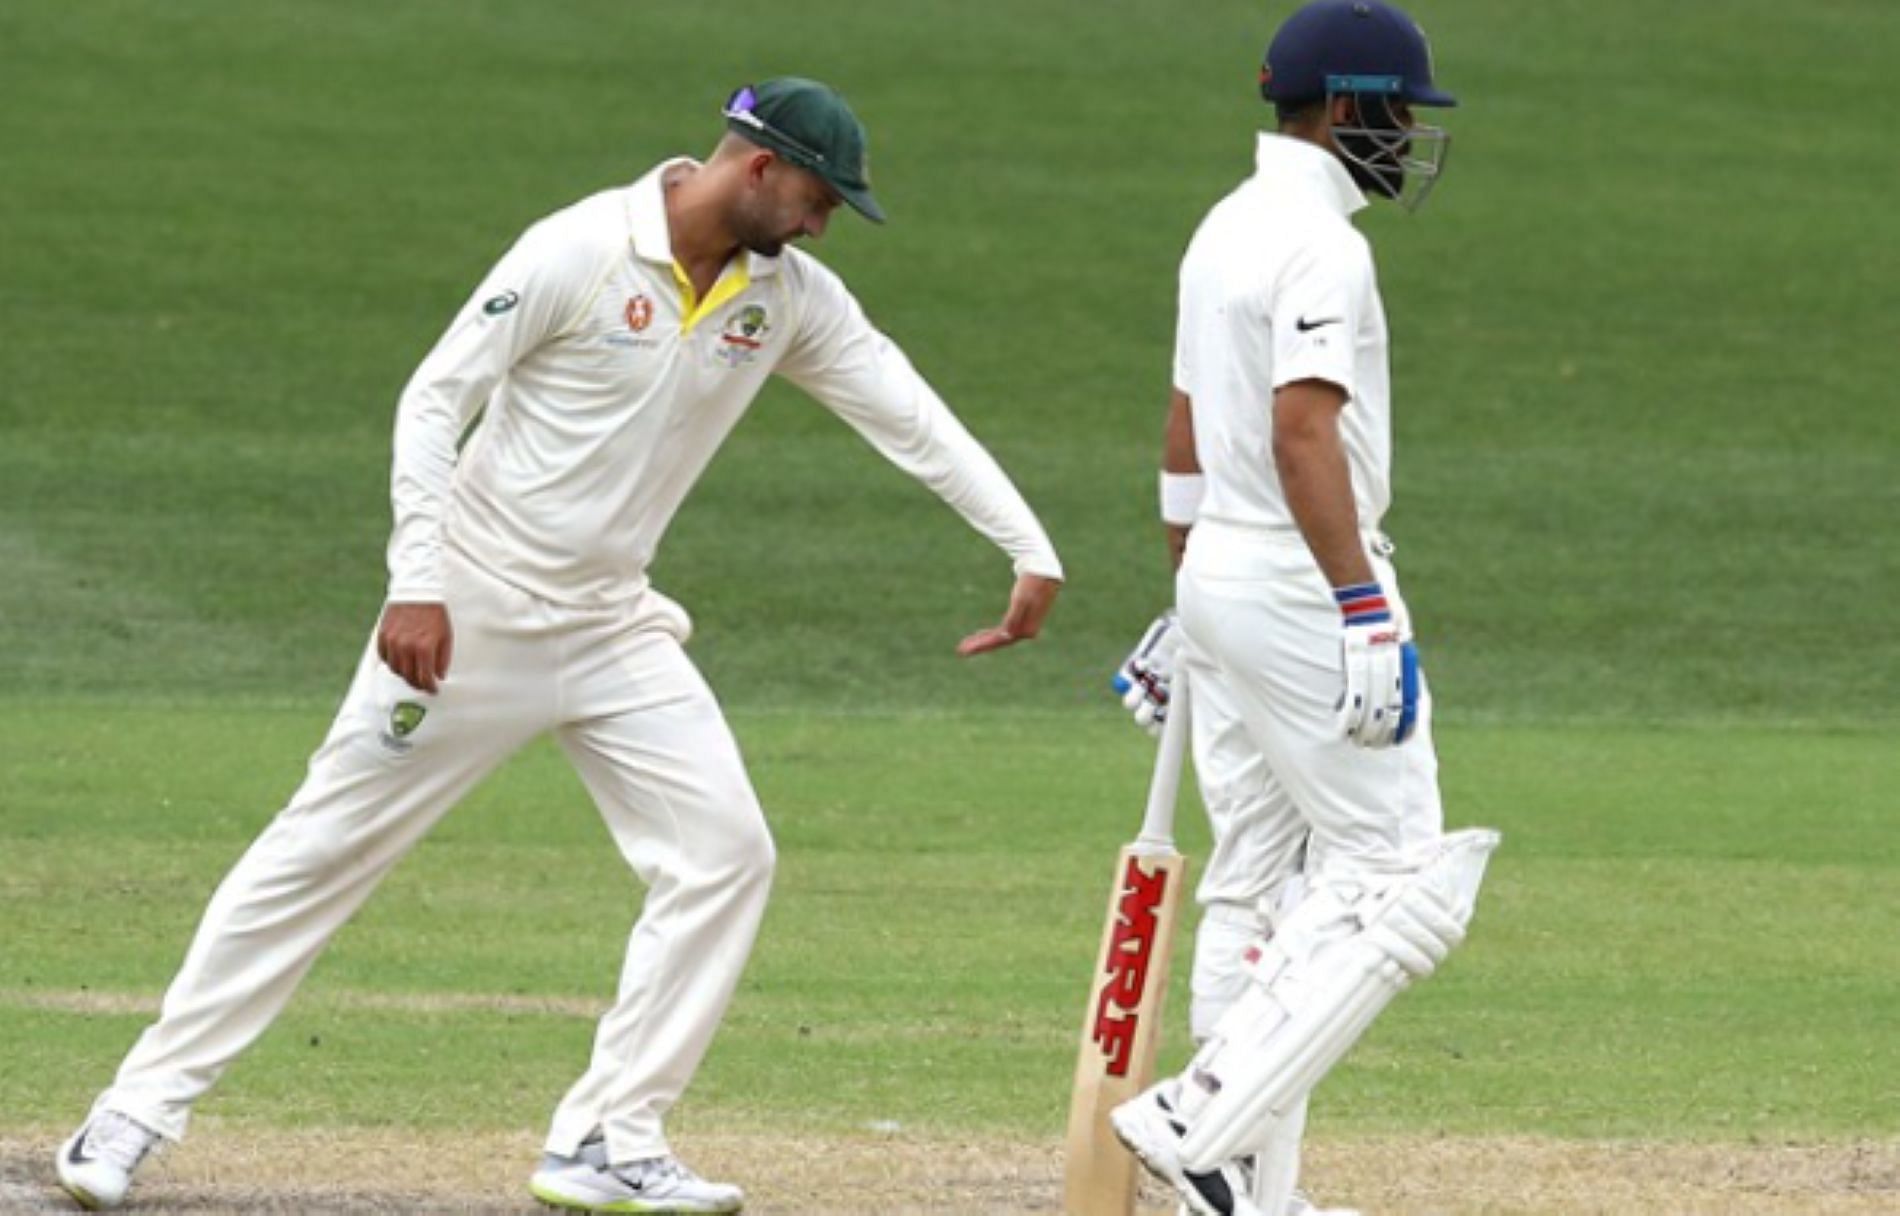 Lyon and Kohli have had several fierce battles over the years